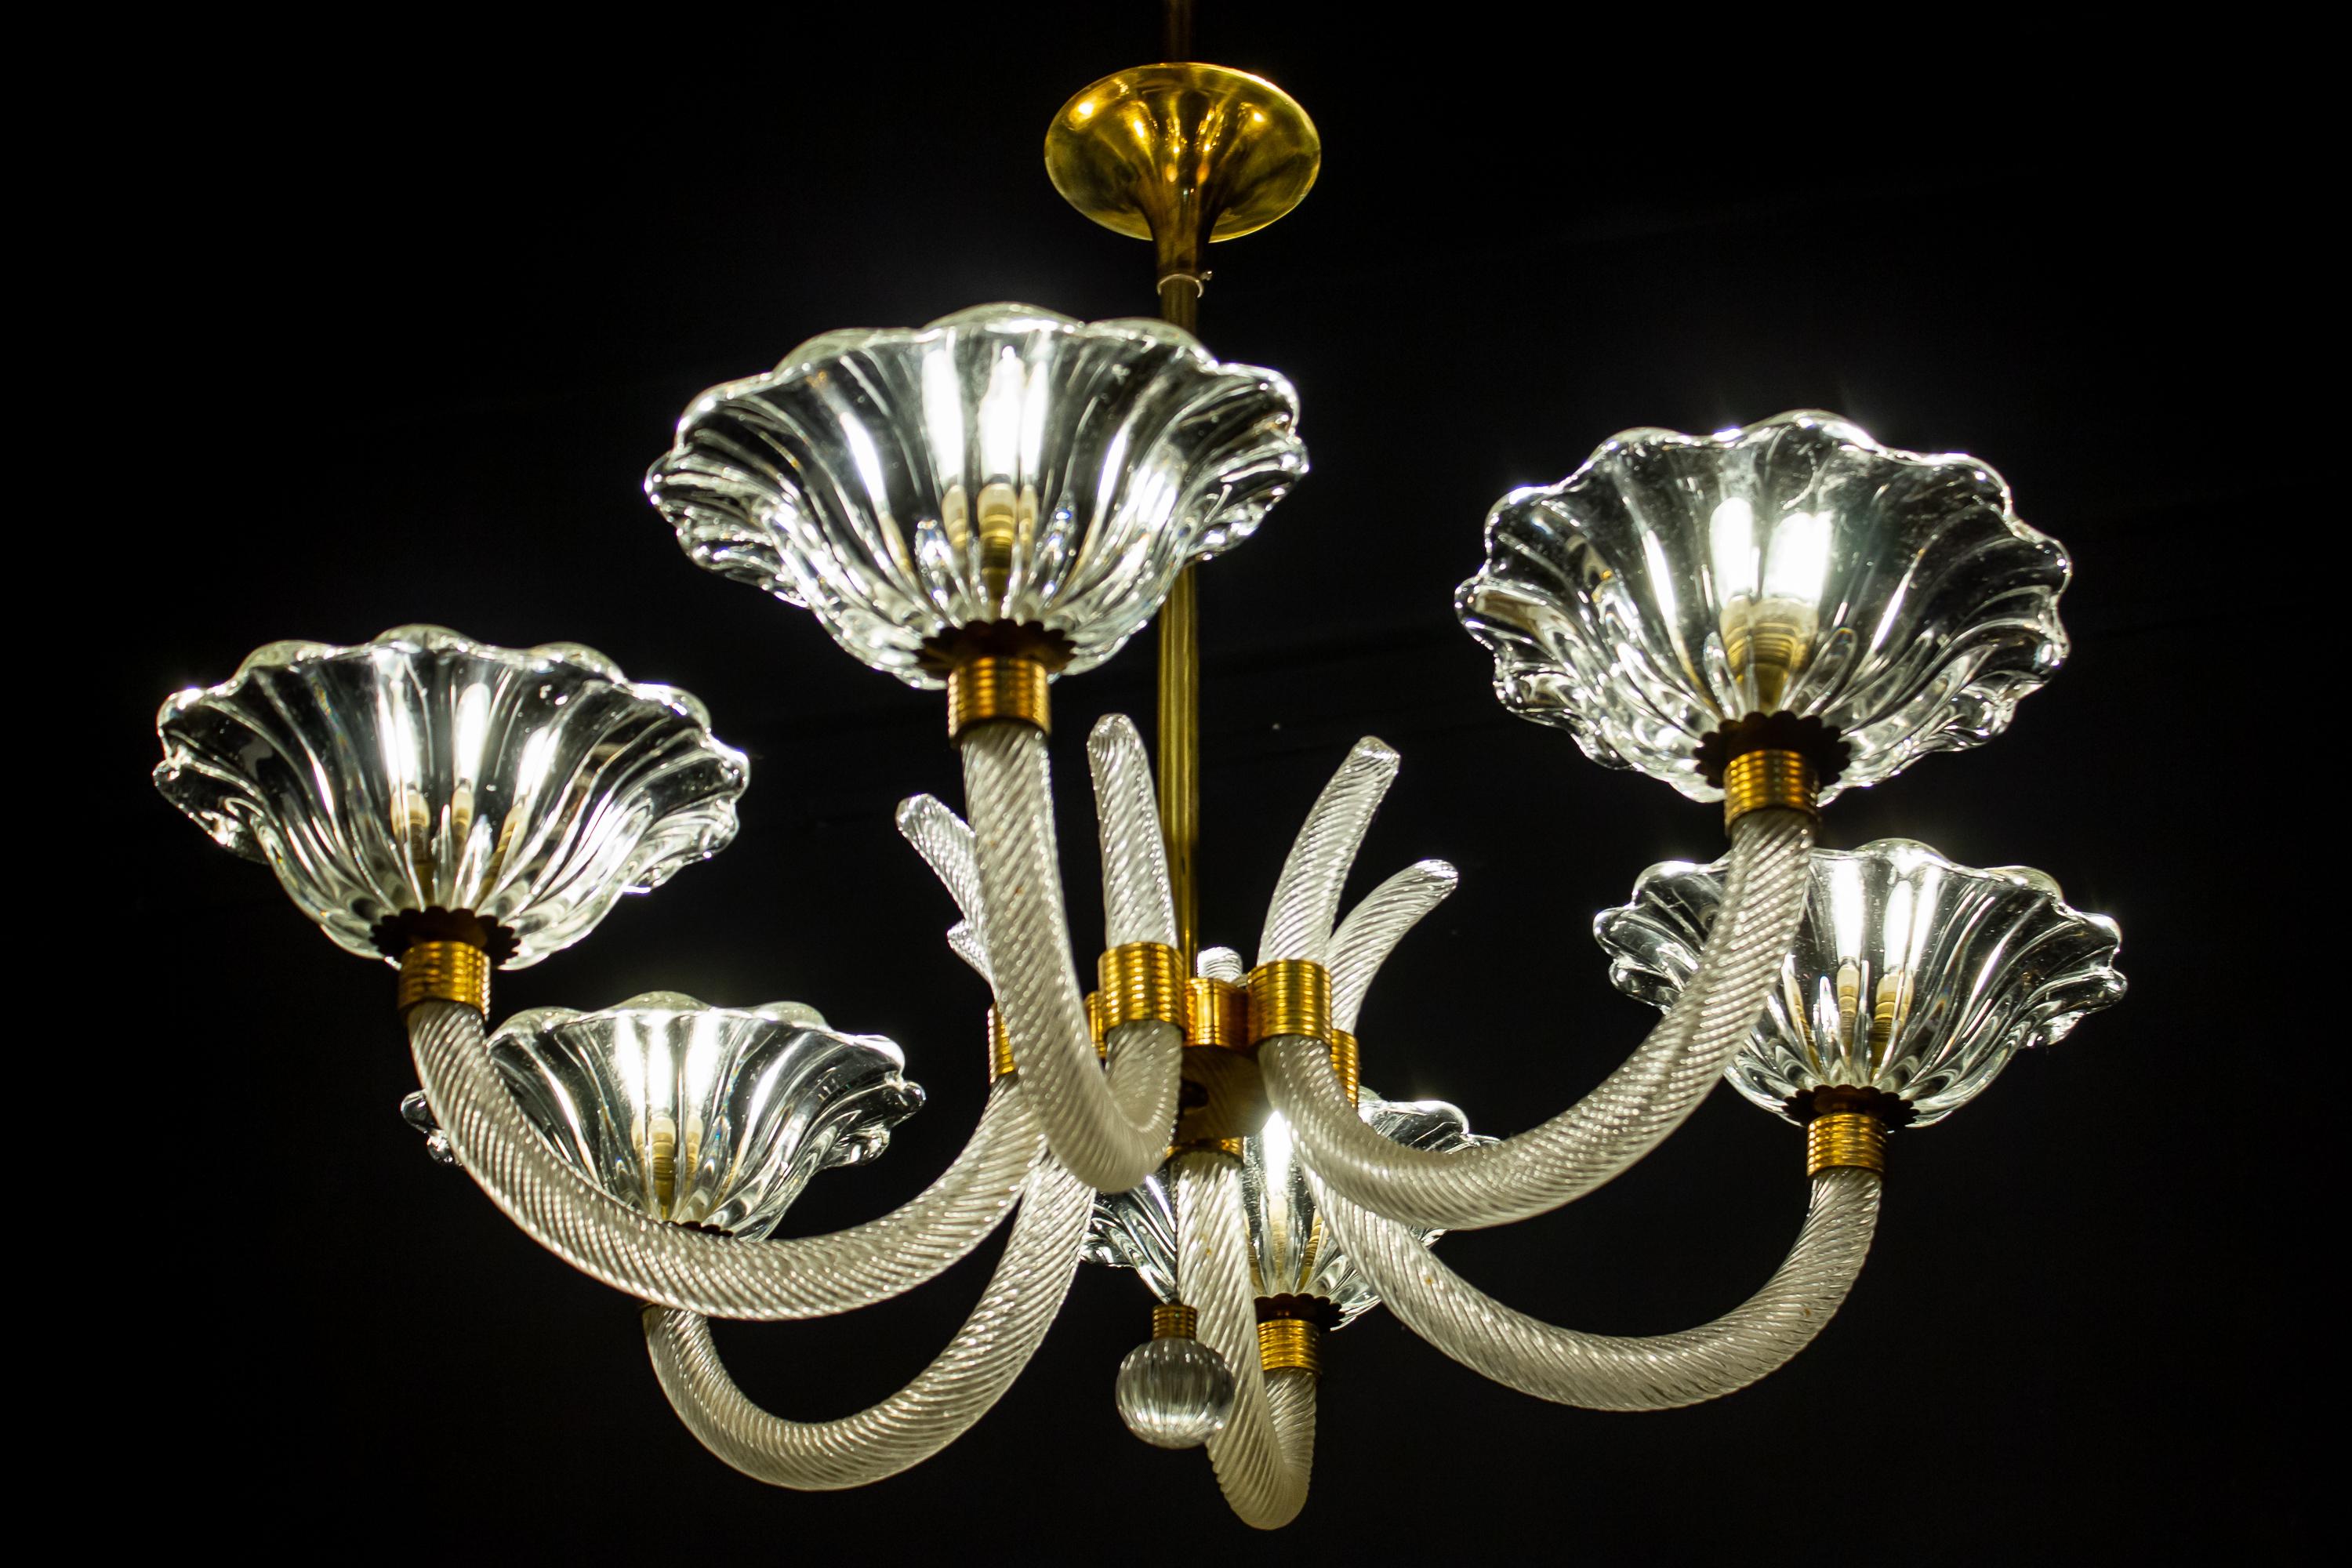 Exceptional six-shade Murano glass chandelier with elegant shaped brass mount, by Ercole Barovier.
Excellent vintage condition, the glasses are in perfect condition.
Six E 27 light bulbs compatible with US standards.